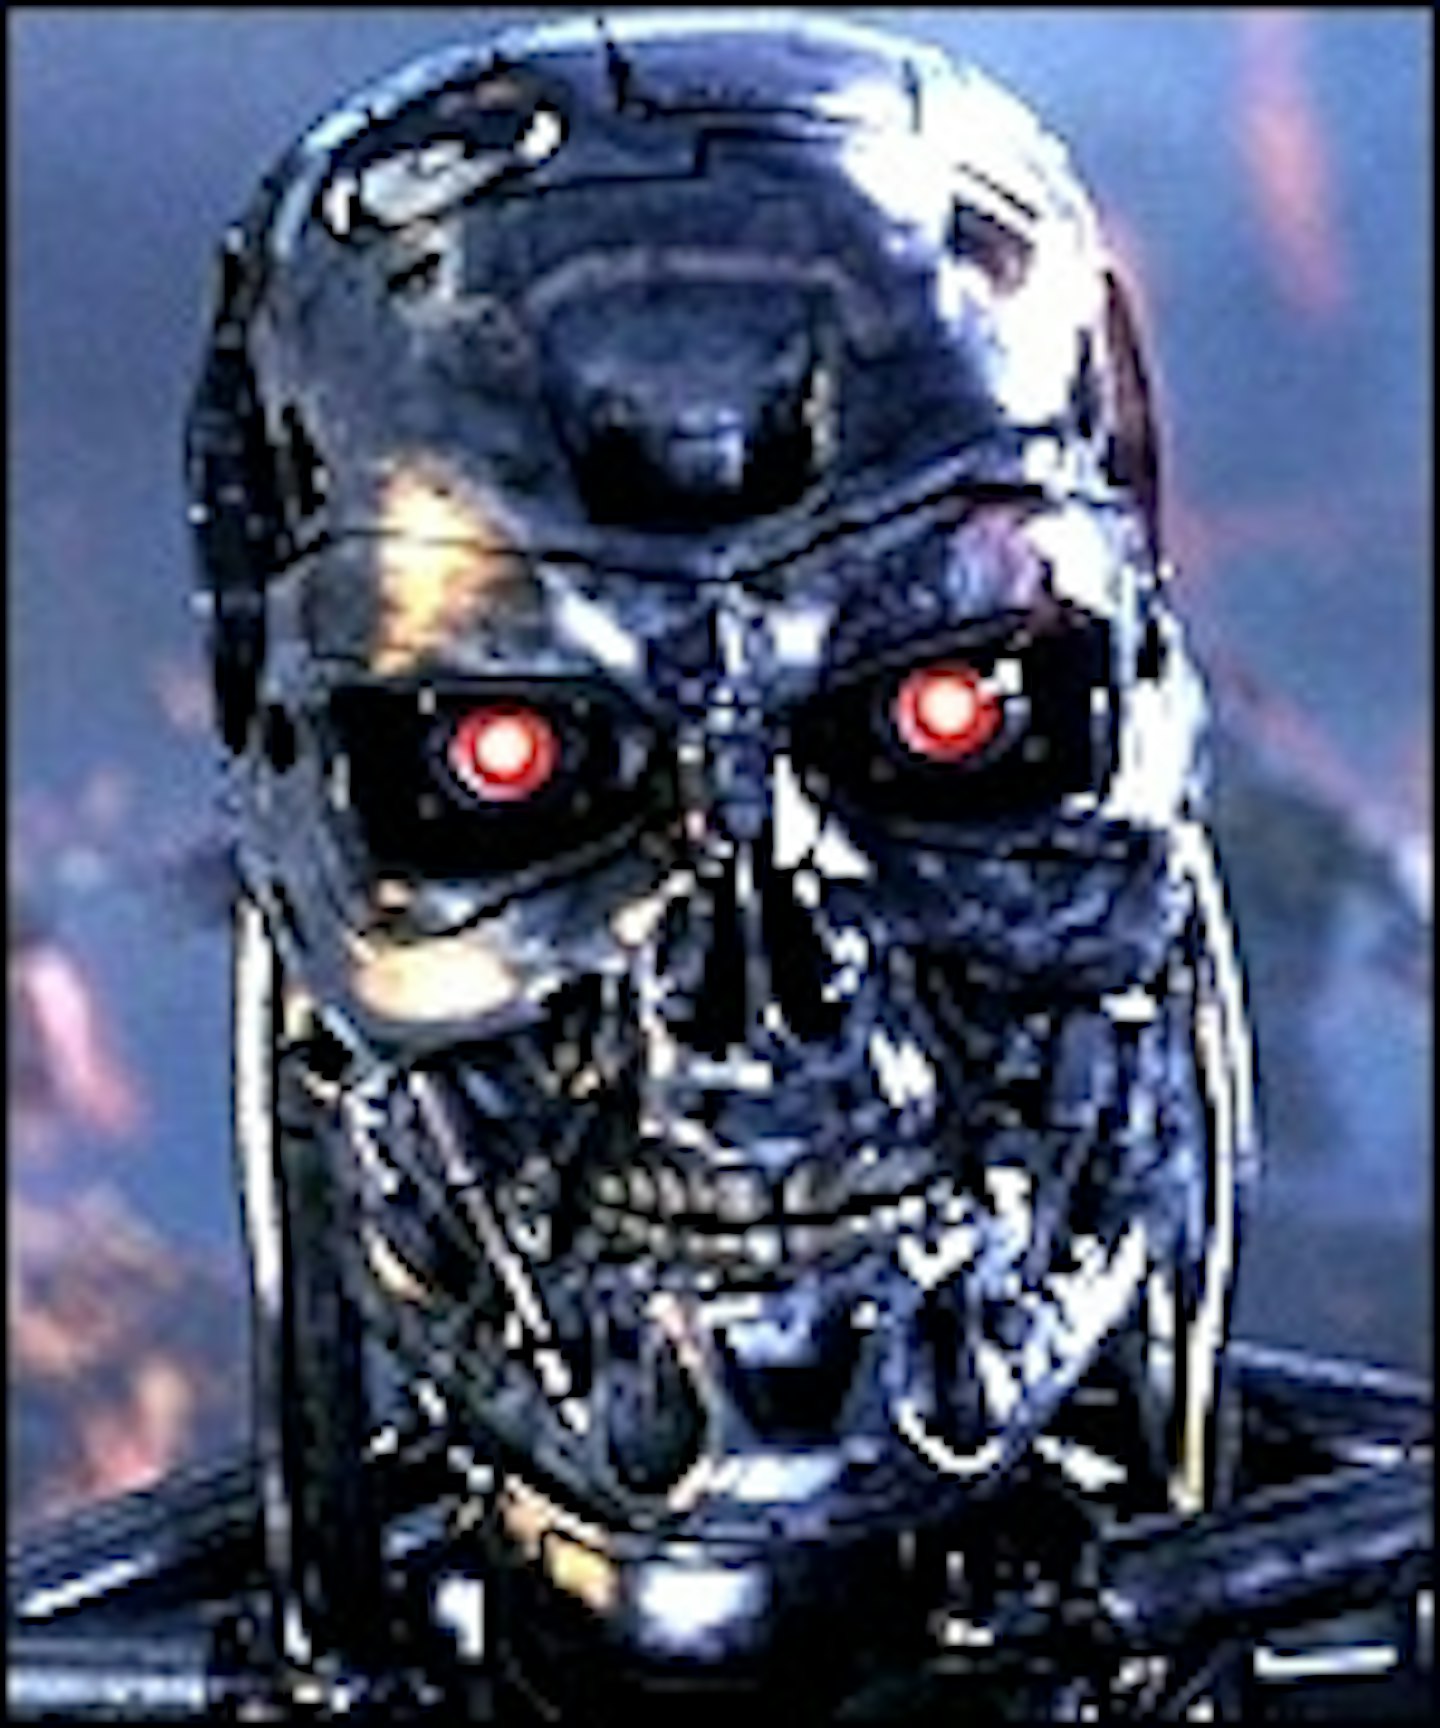 A New Trilogy of Terminator Movies